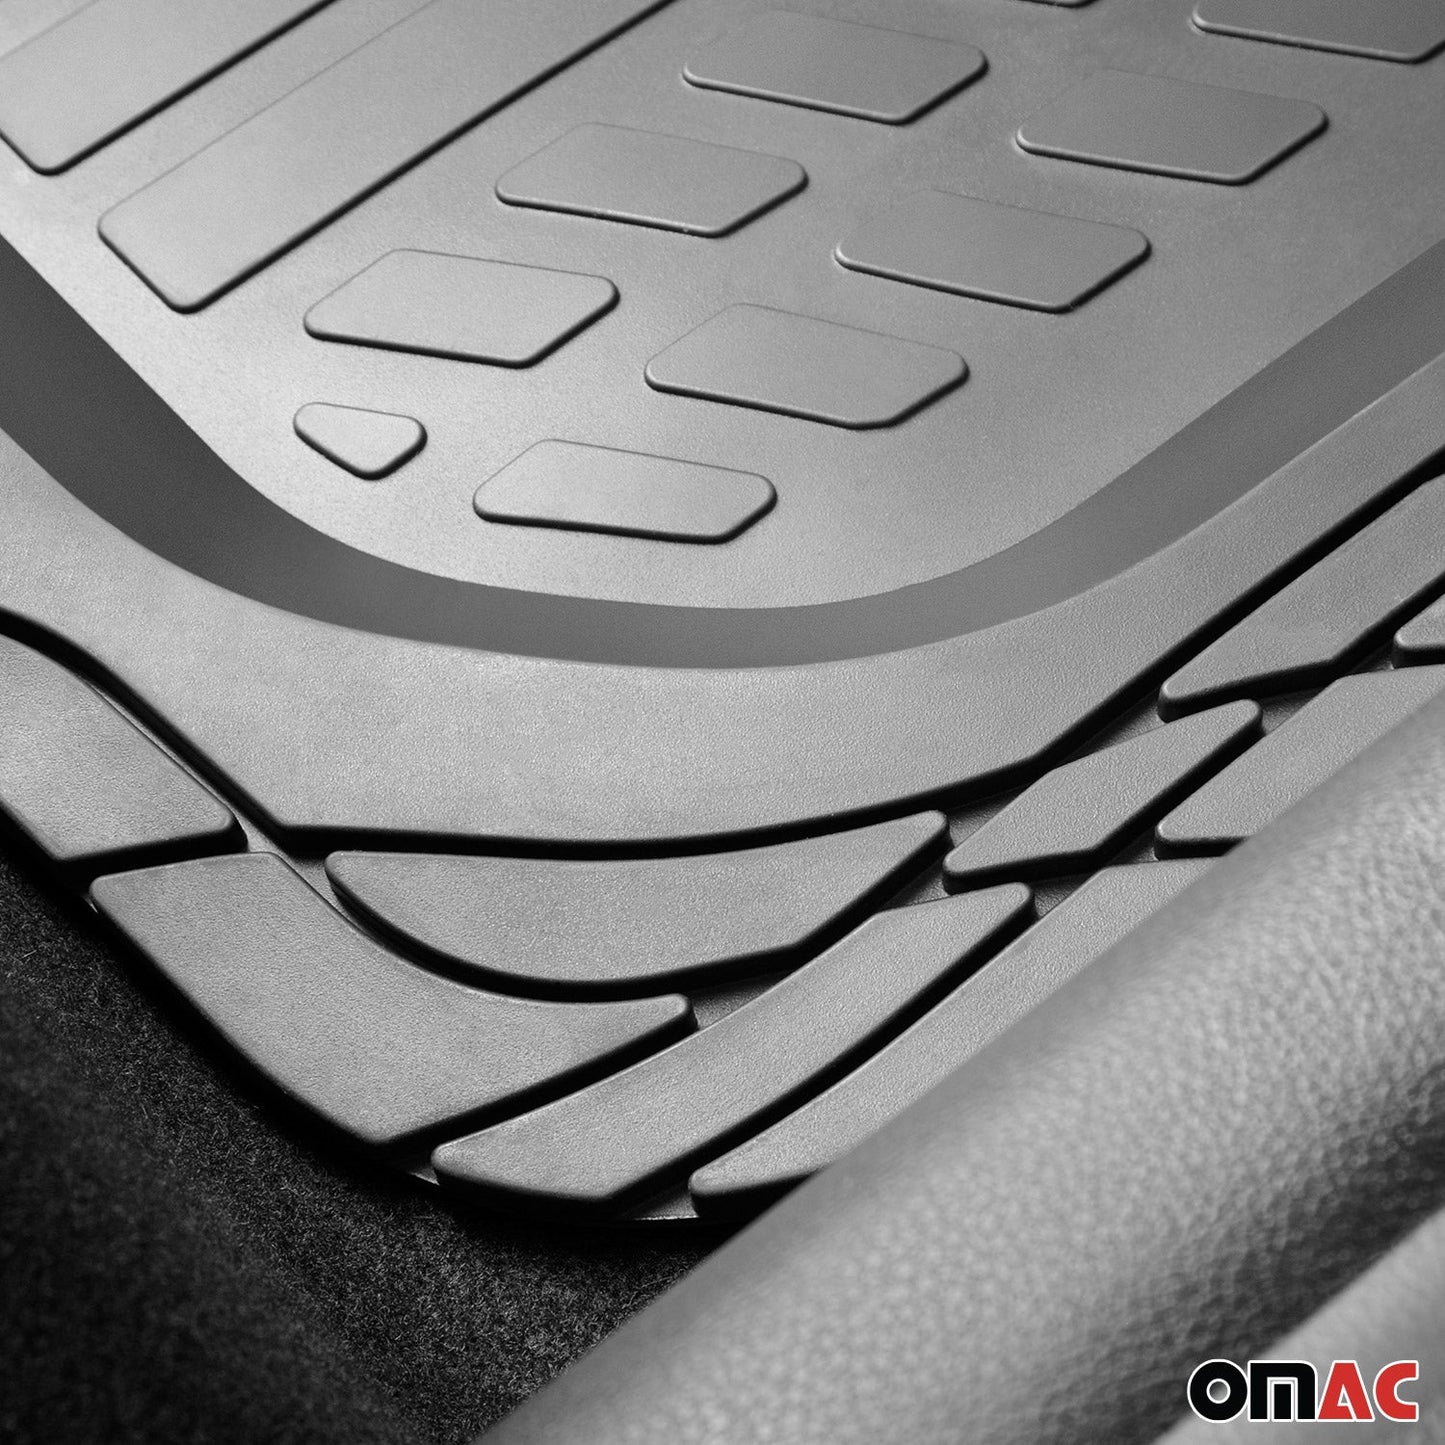 OMAC Trimmable Floor Mats Liner Waterproof for BMW 4 Series Rubber Black 4Pcs A058204